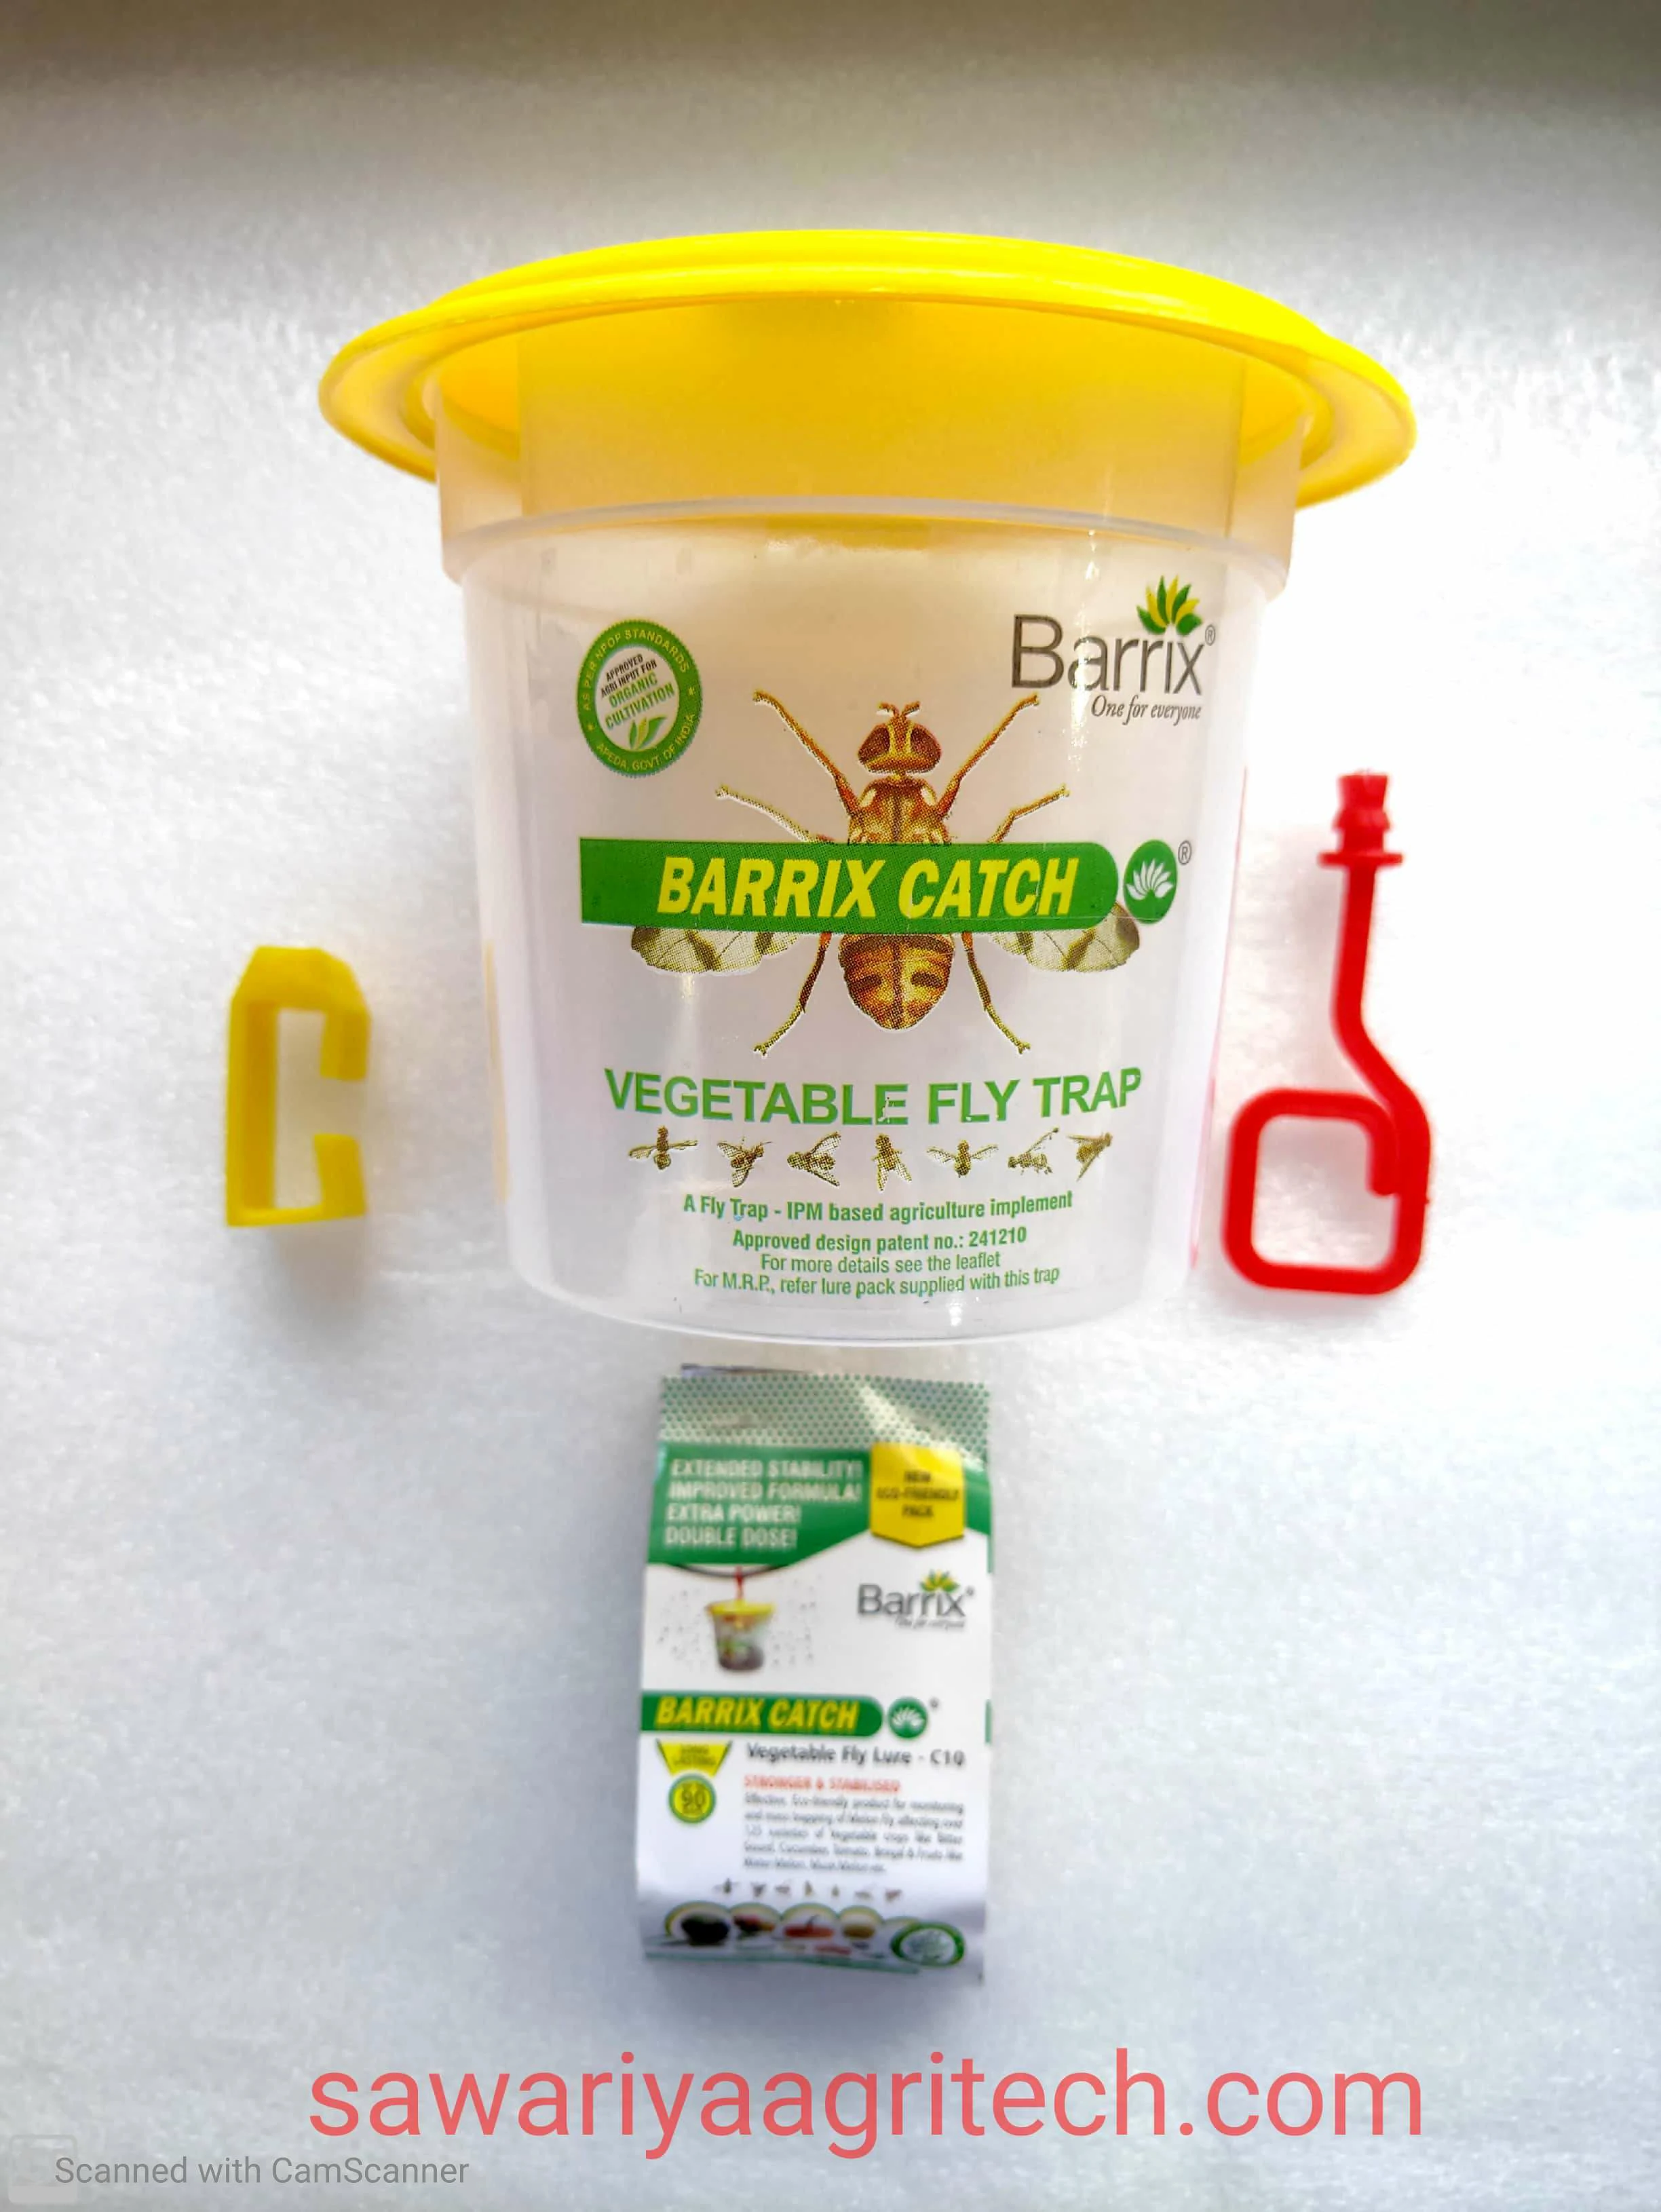 Vegetable Fly Trap Barrix Catch